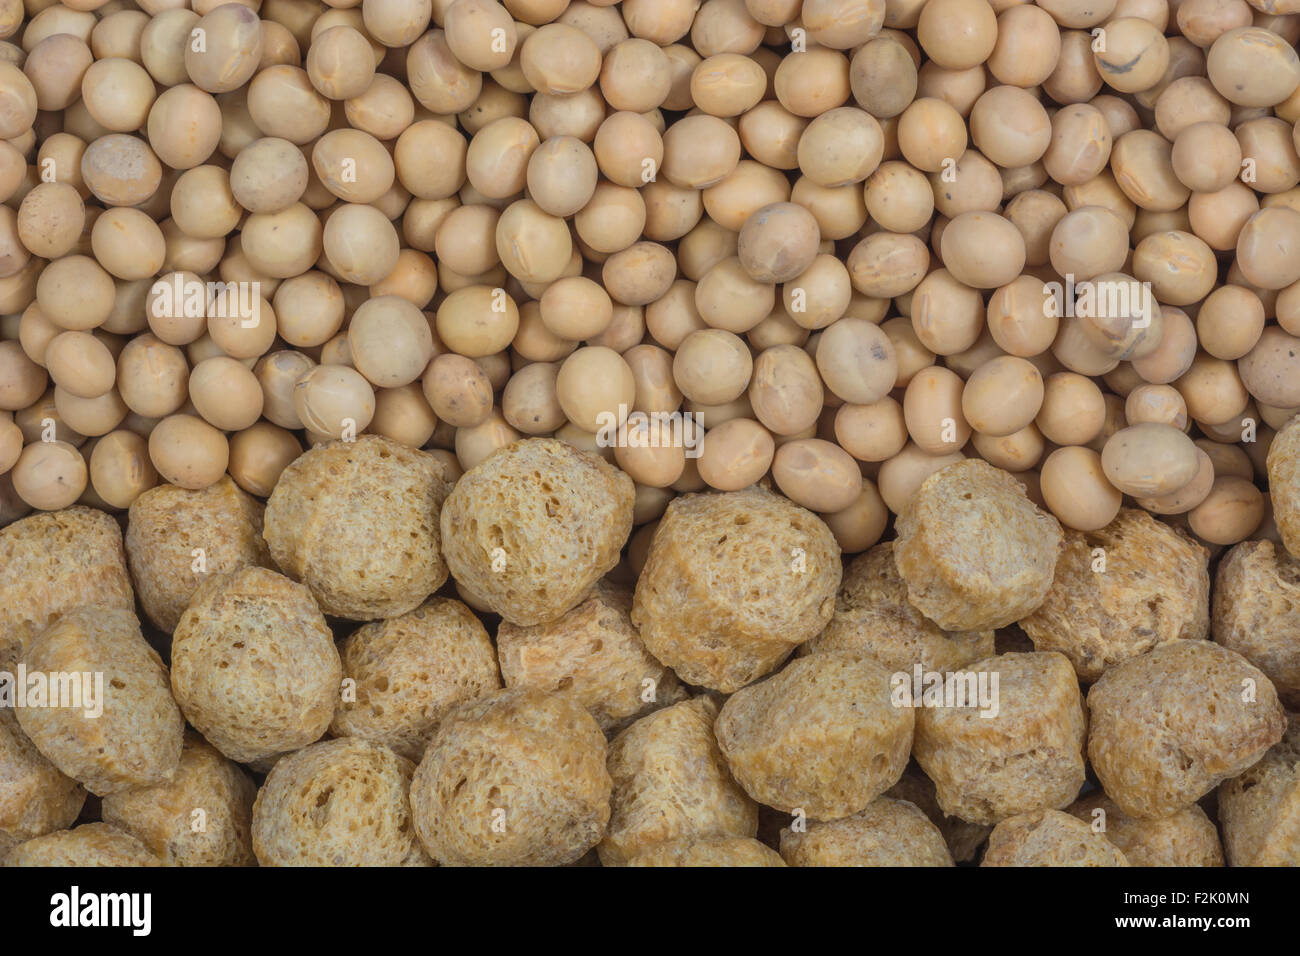 Close-up dried soy / soya beans and soy bean chunks. Used in vegetarian food / cookery. Concept US-China trade tariff war, Soybean products. Stock Photo